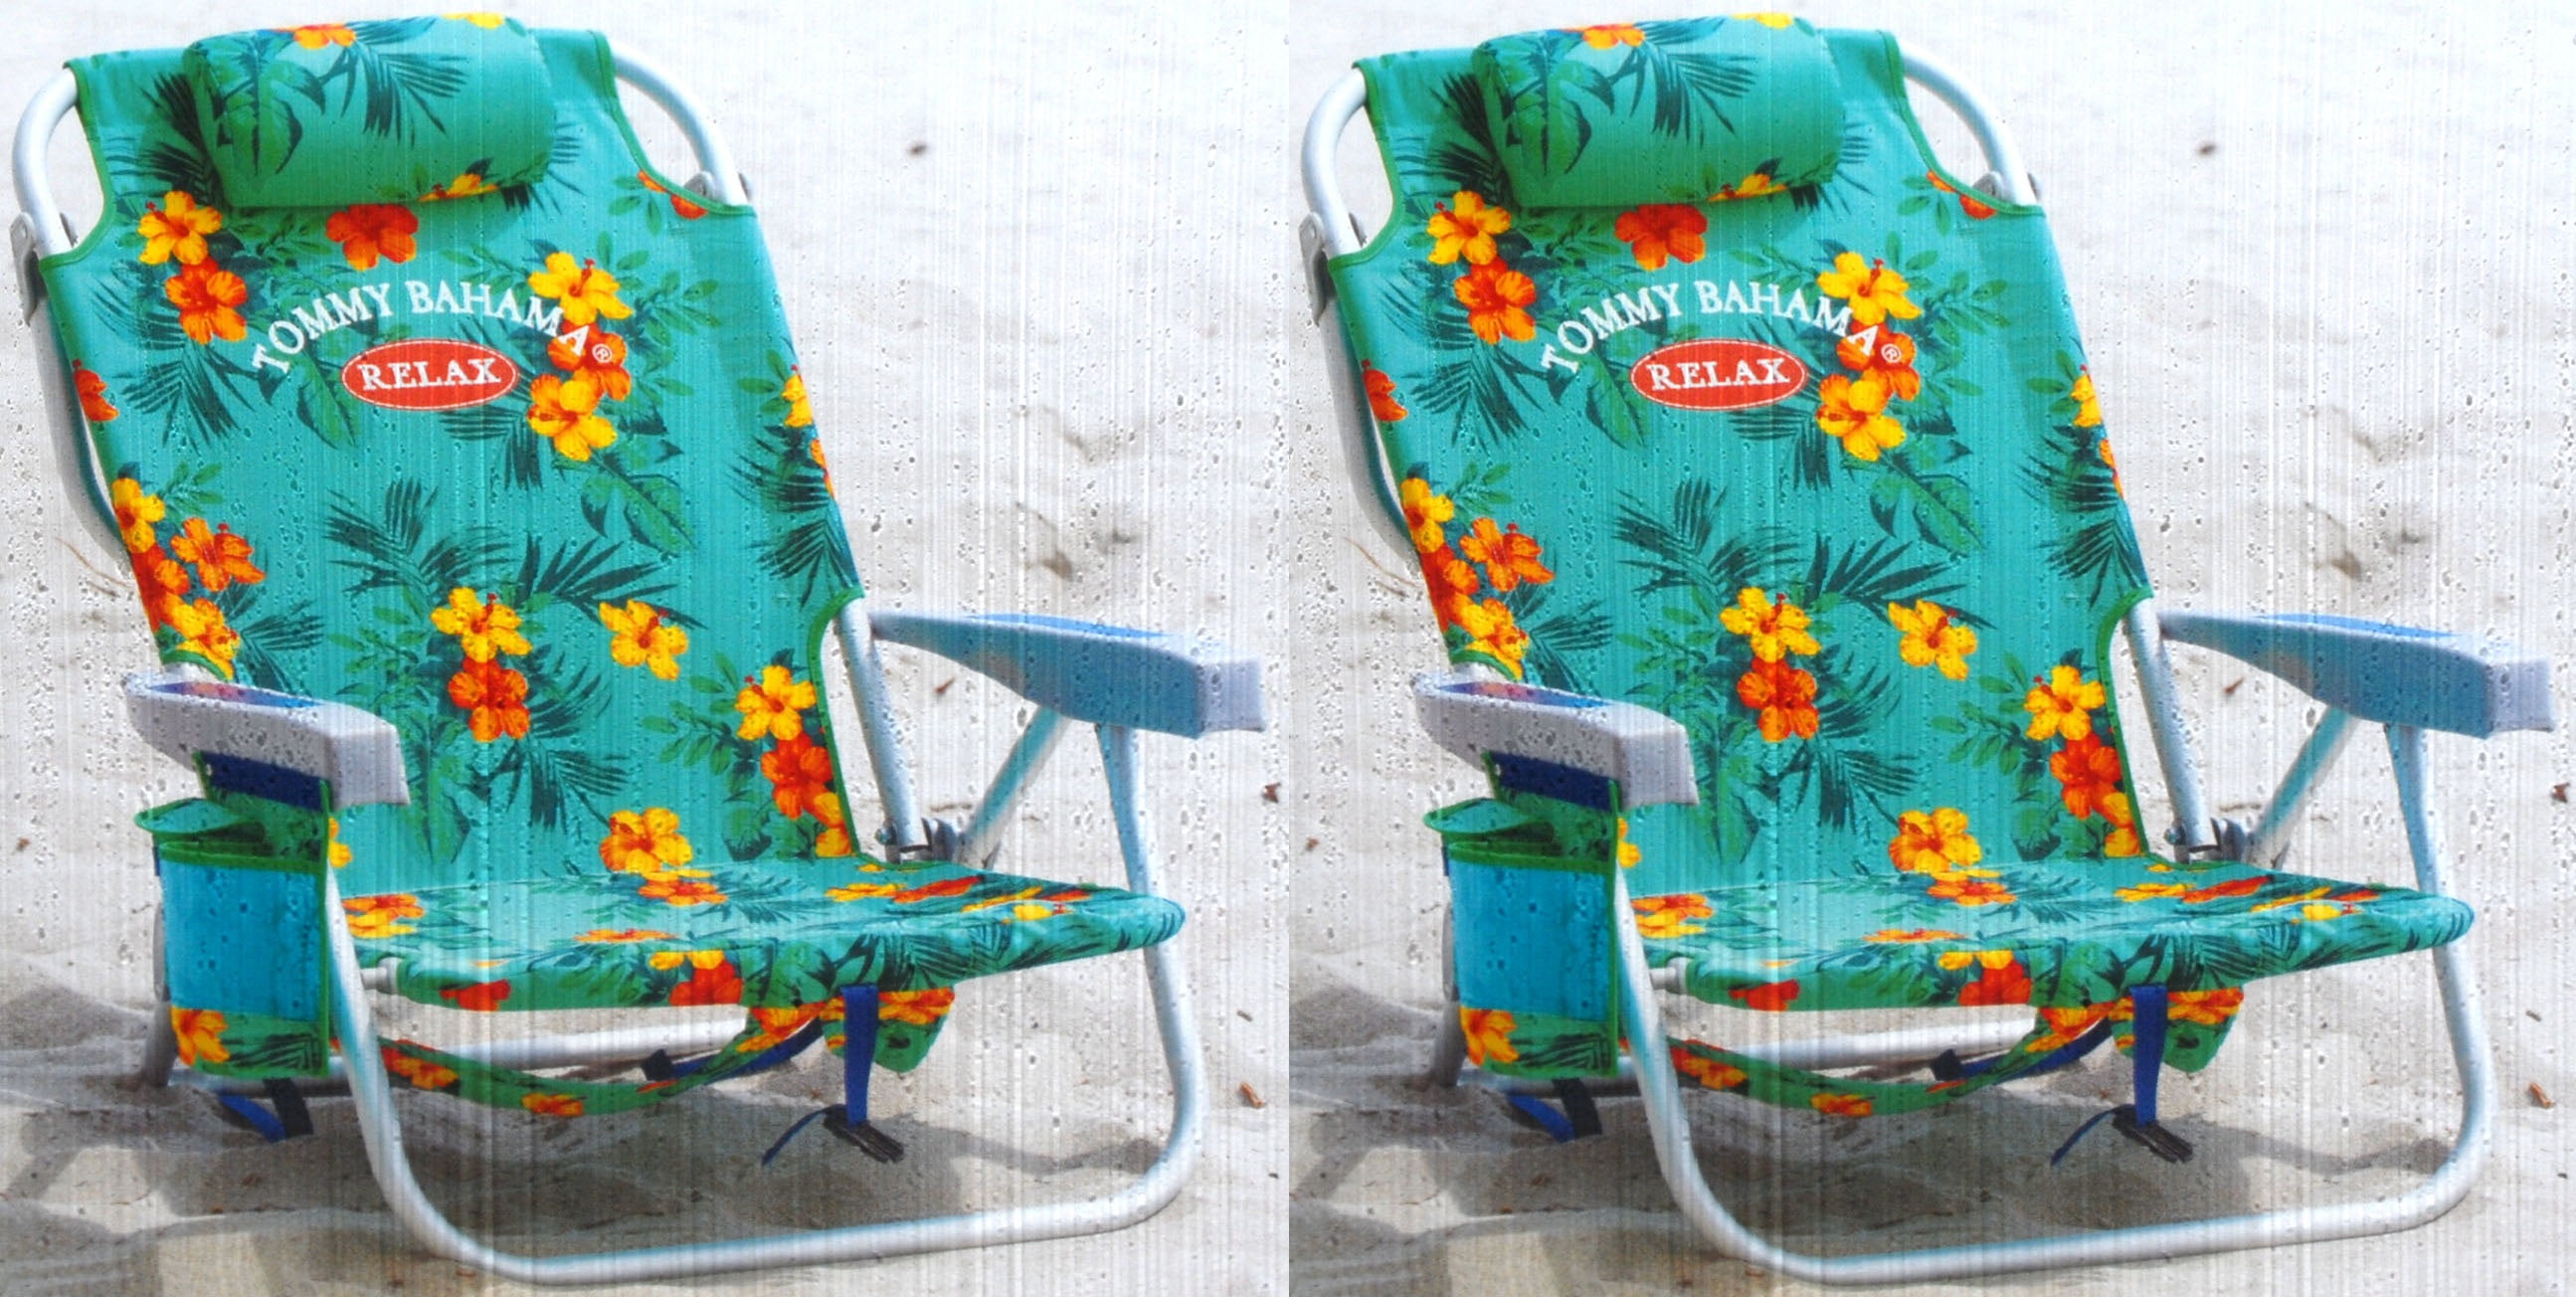 New Tommy Bahama Orange Beach Chair for Simple Design